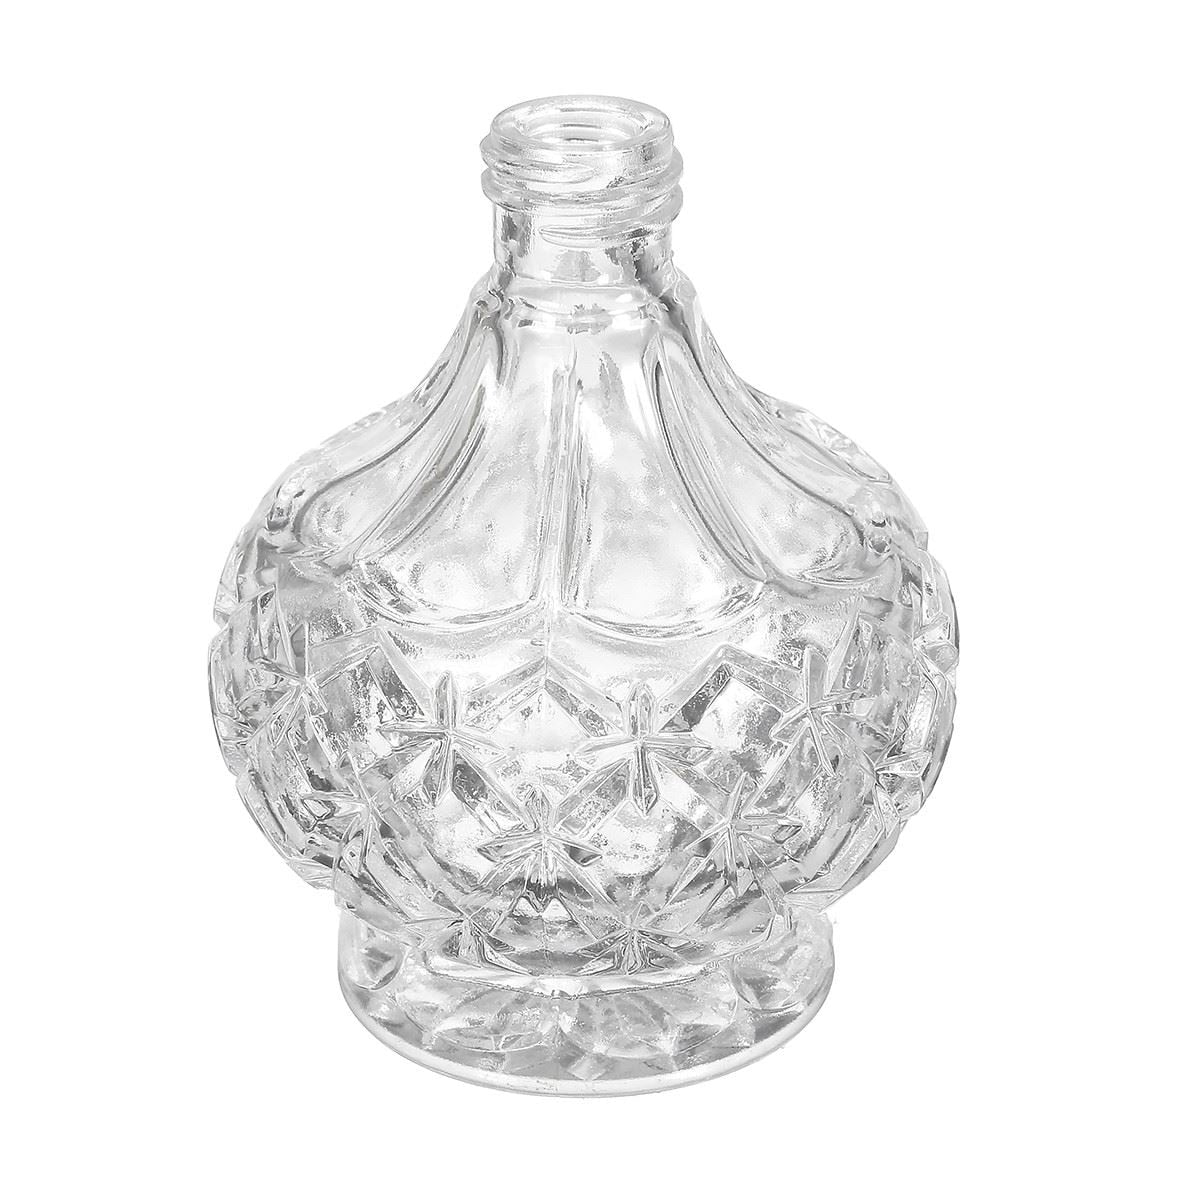 80ml Clear Crystal Vintage Style Perfume Atomizer Bottle - Go Steampunk